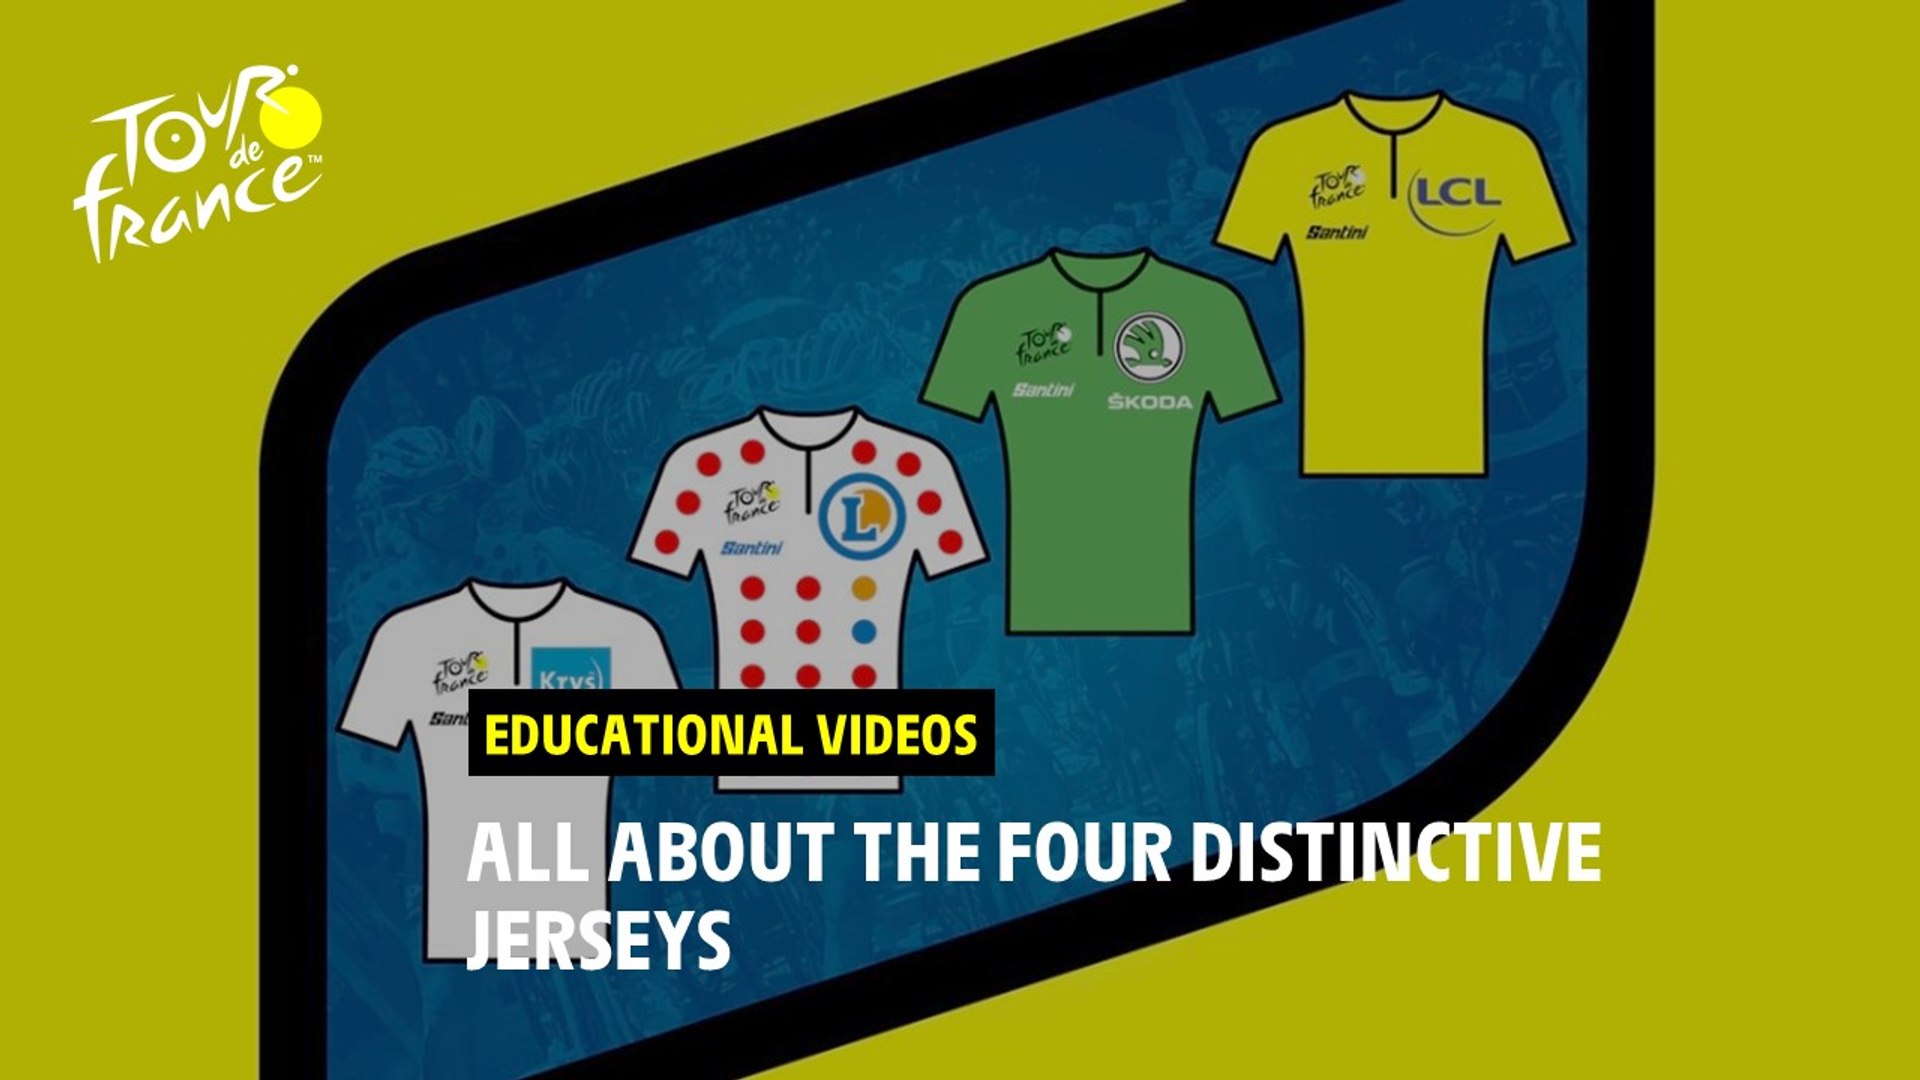 Looking for an educational video that will stand out from the rest? Look no further than Distinctive